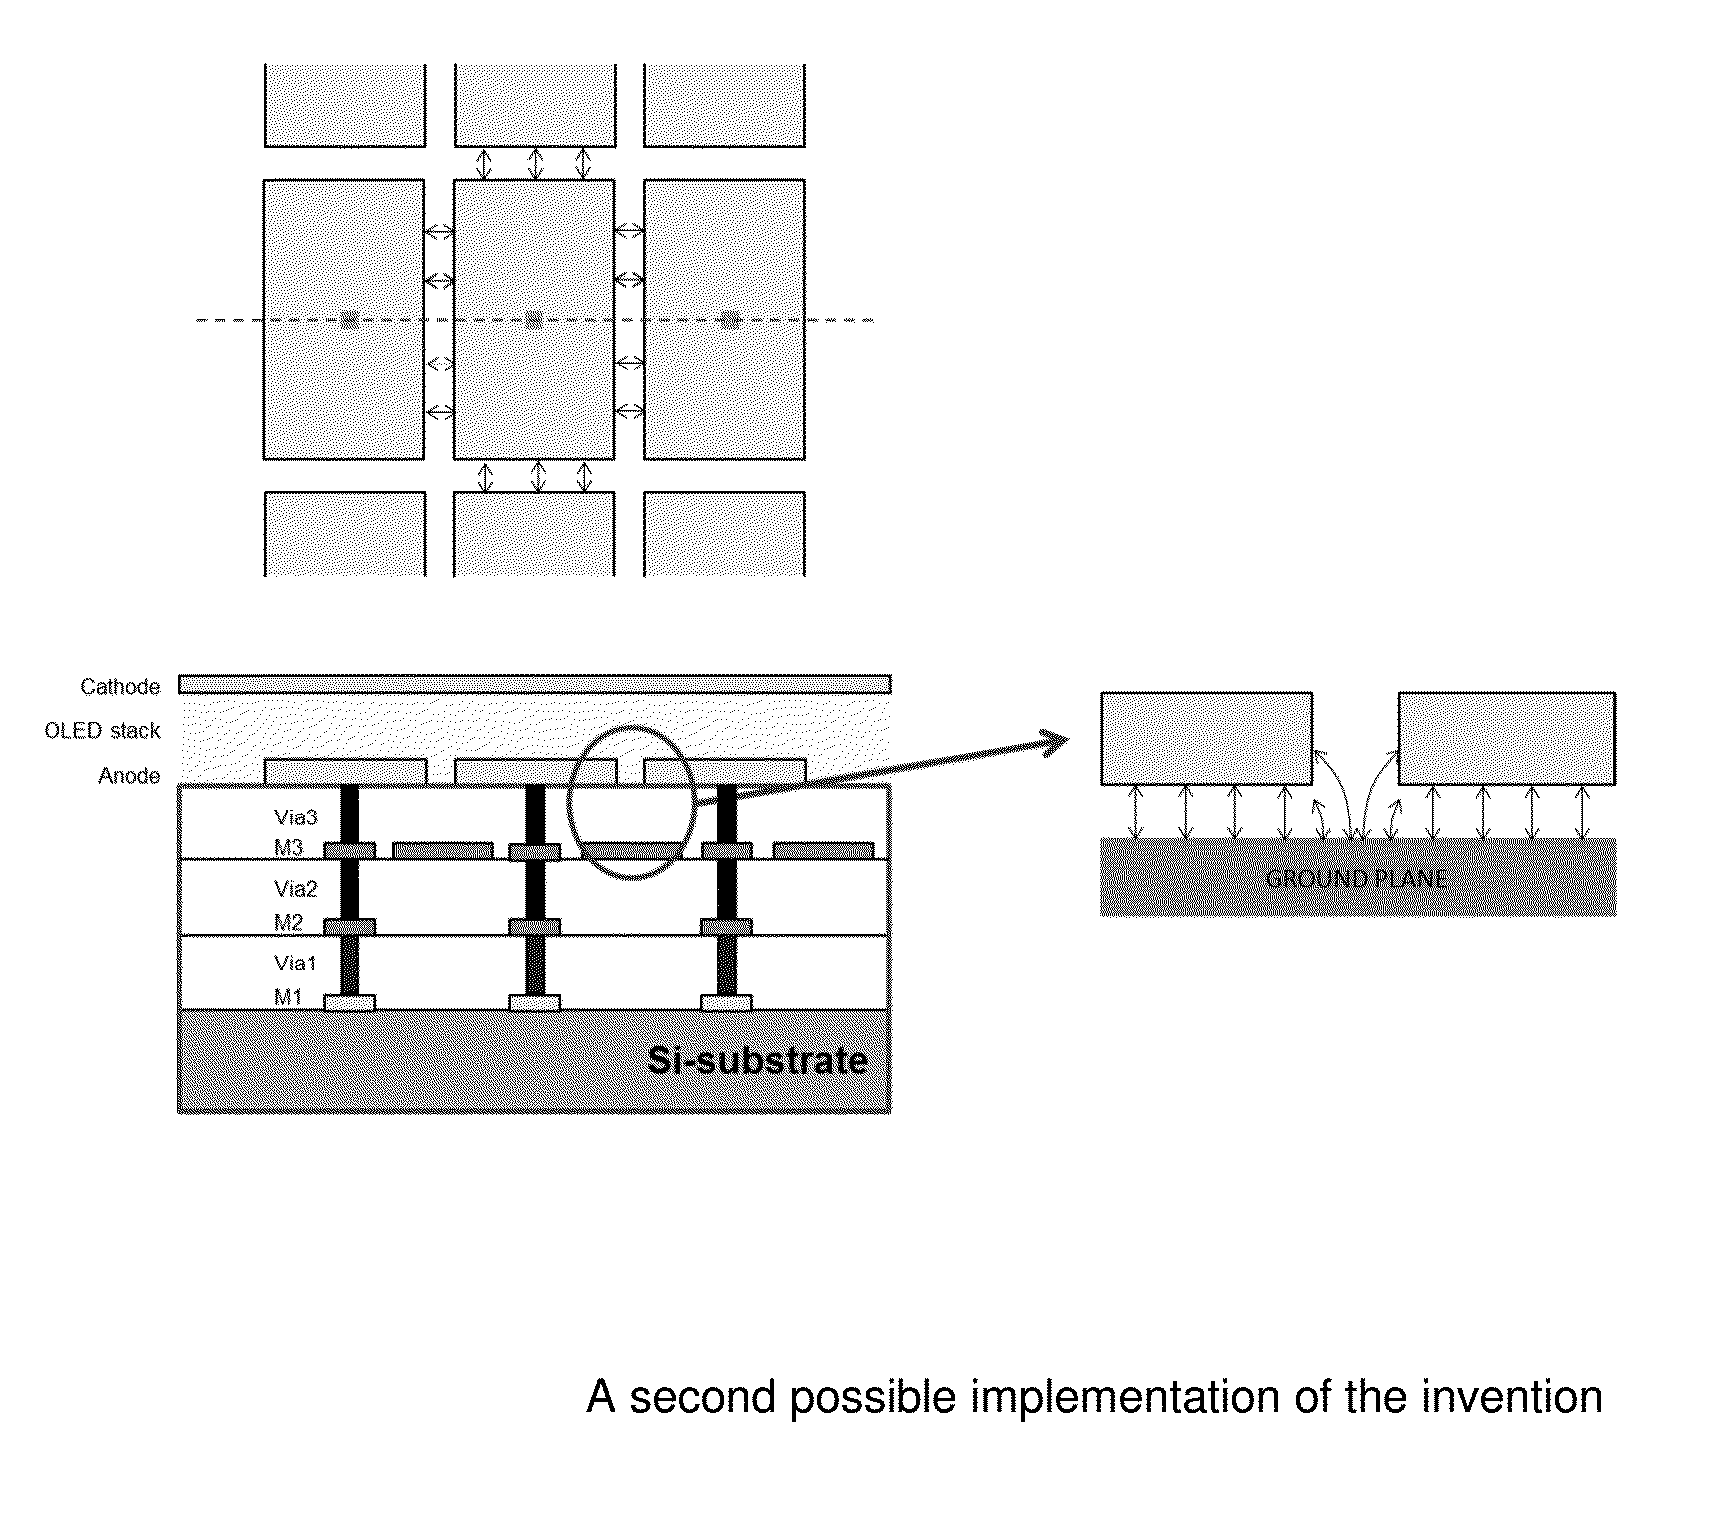 Method for eliminating electrical cross-talk in OLED microdisplays